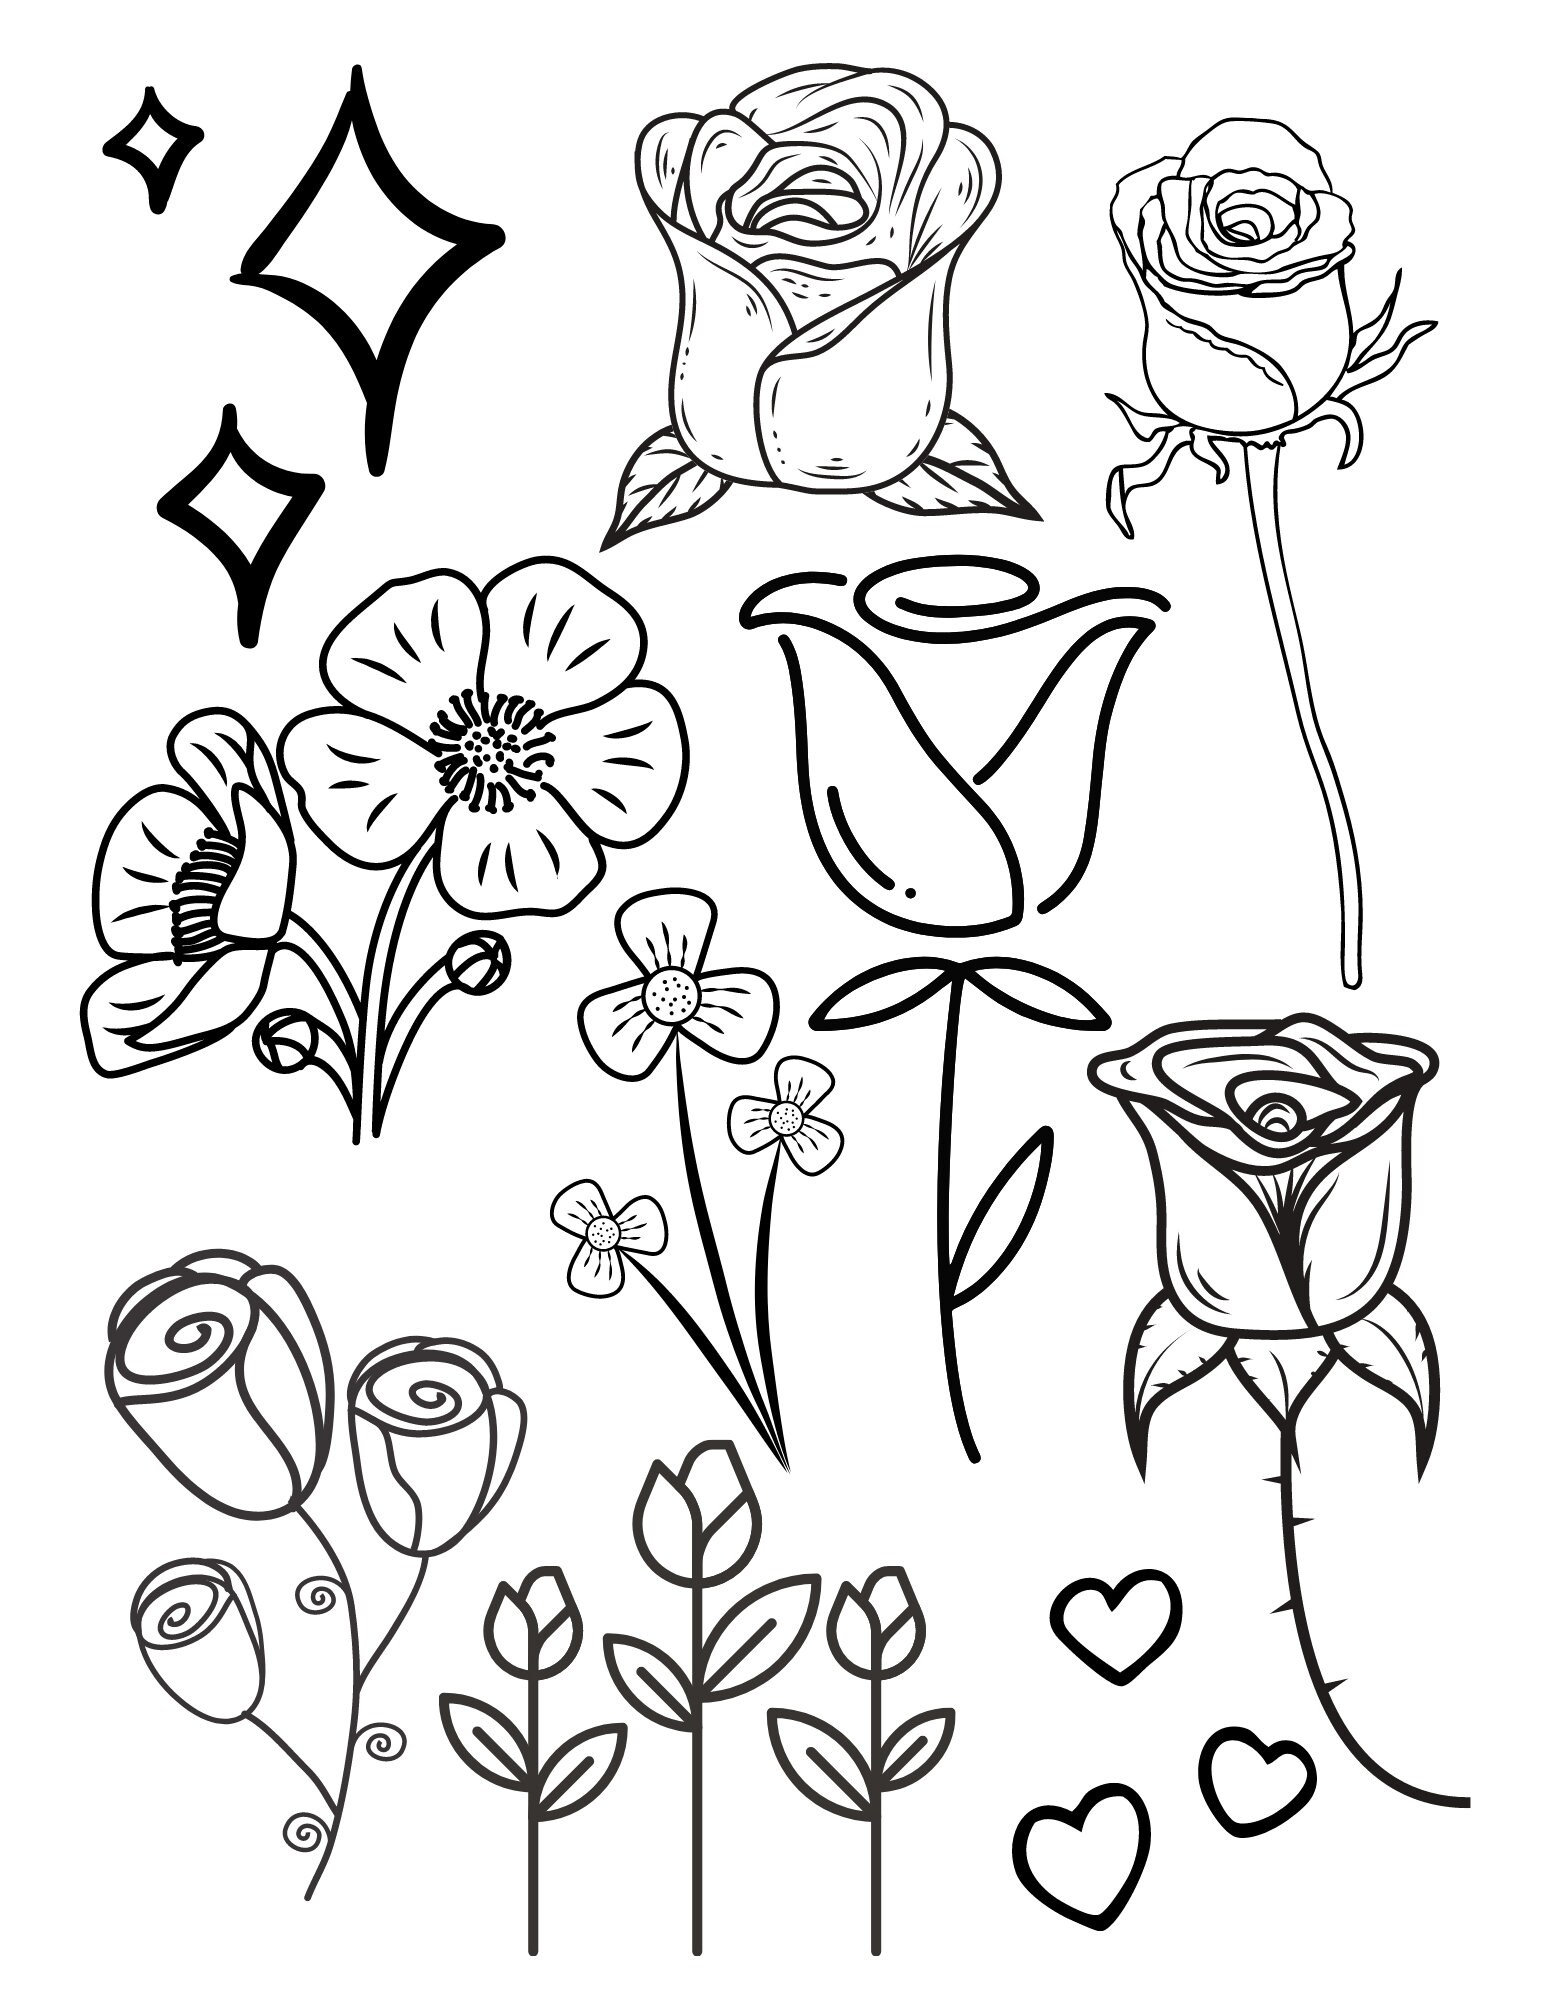 Flowers and roses coloring pagesdigital download